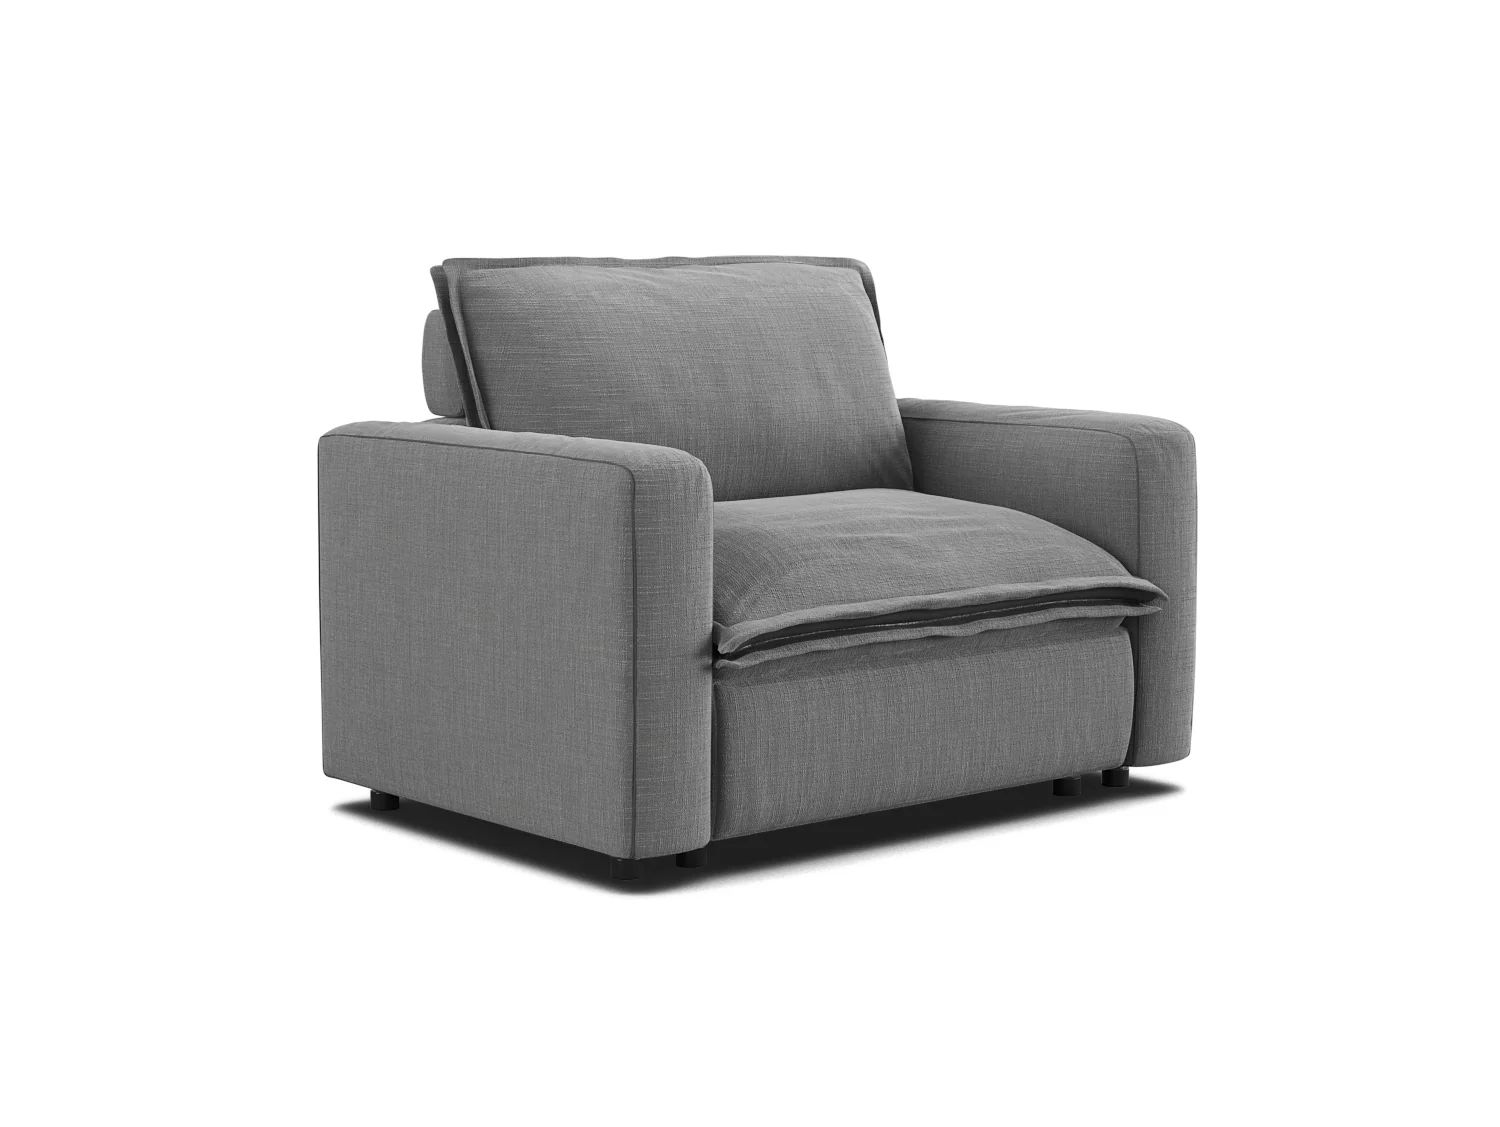 The Recliner: Comfortable fabric reclining chair | Homebody | Homebody